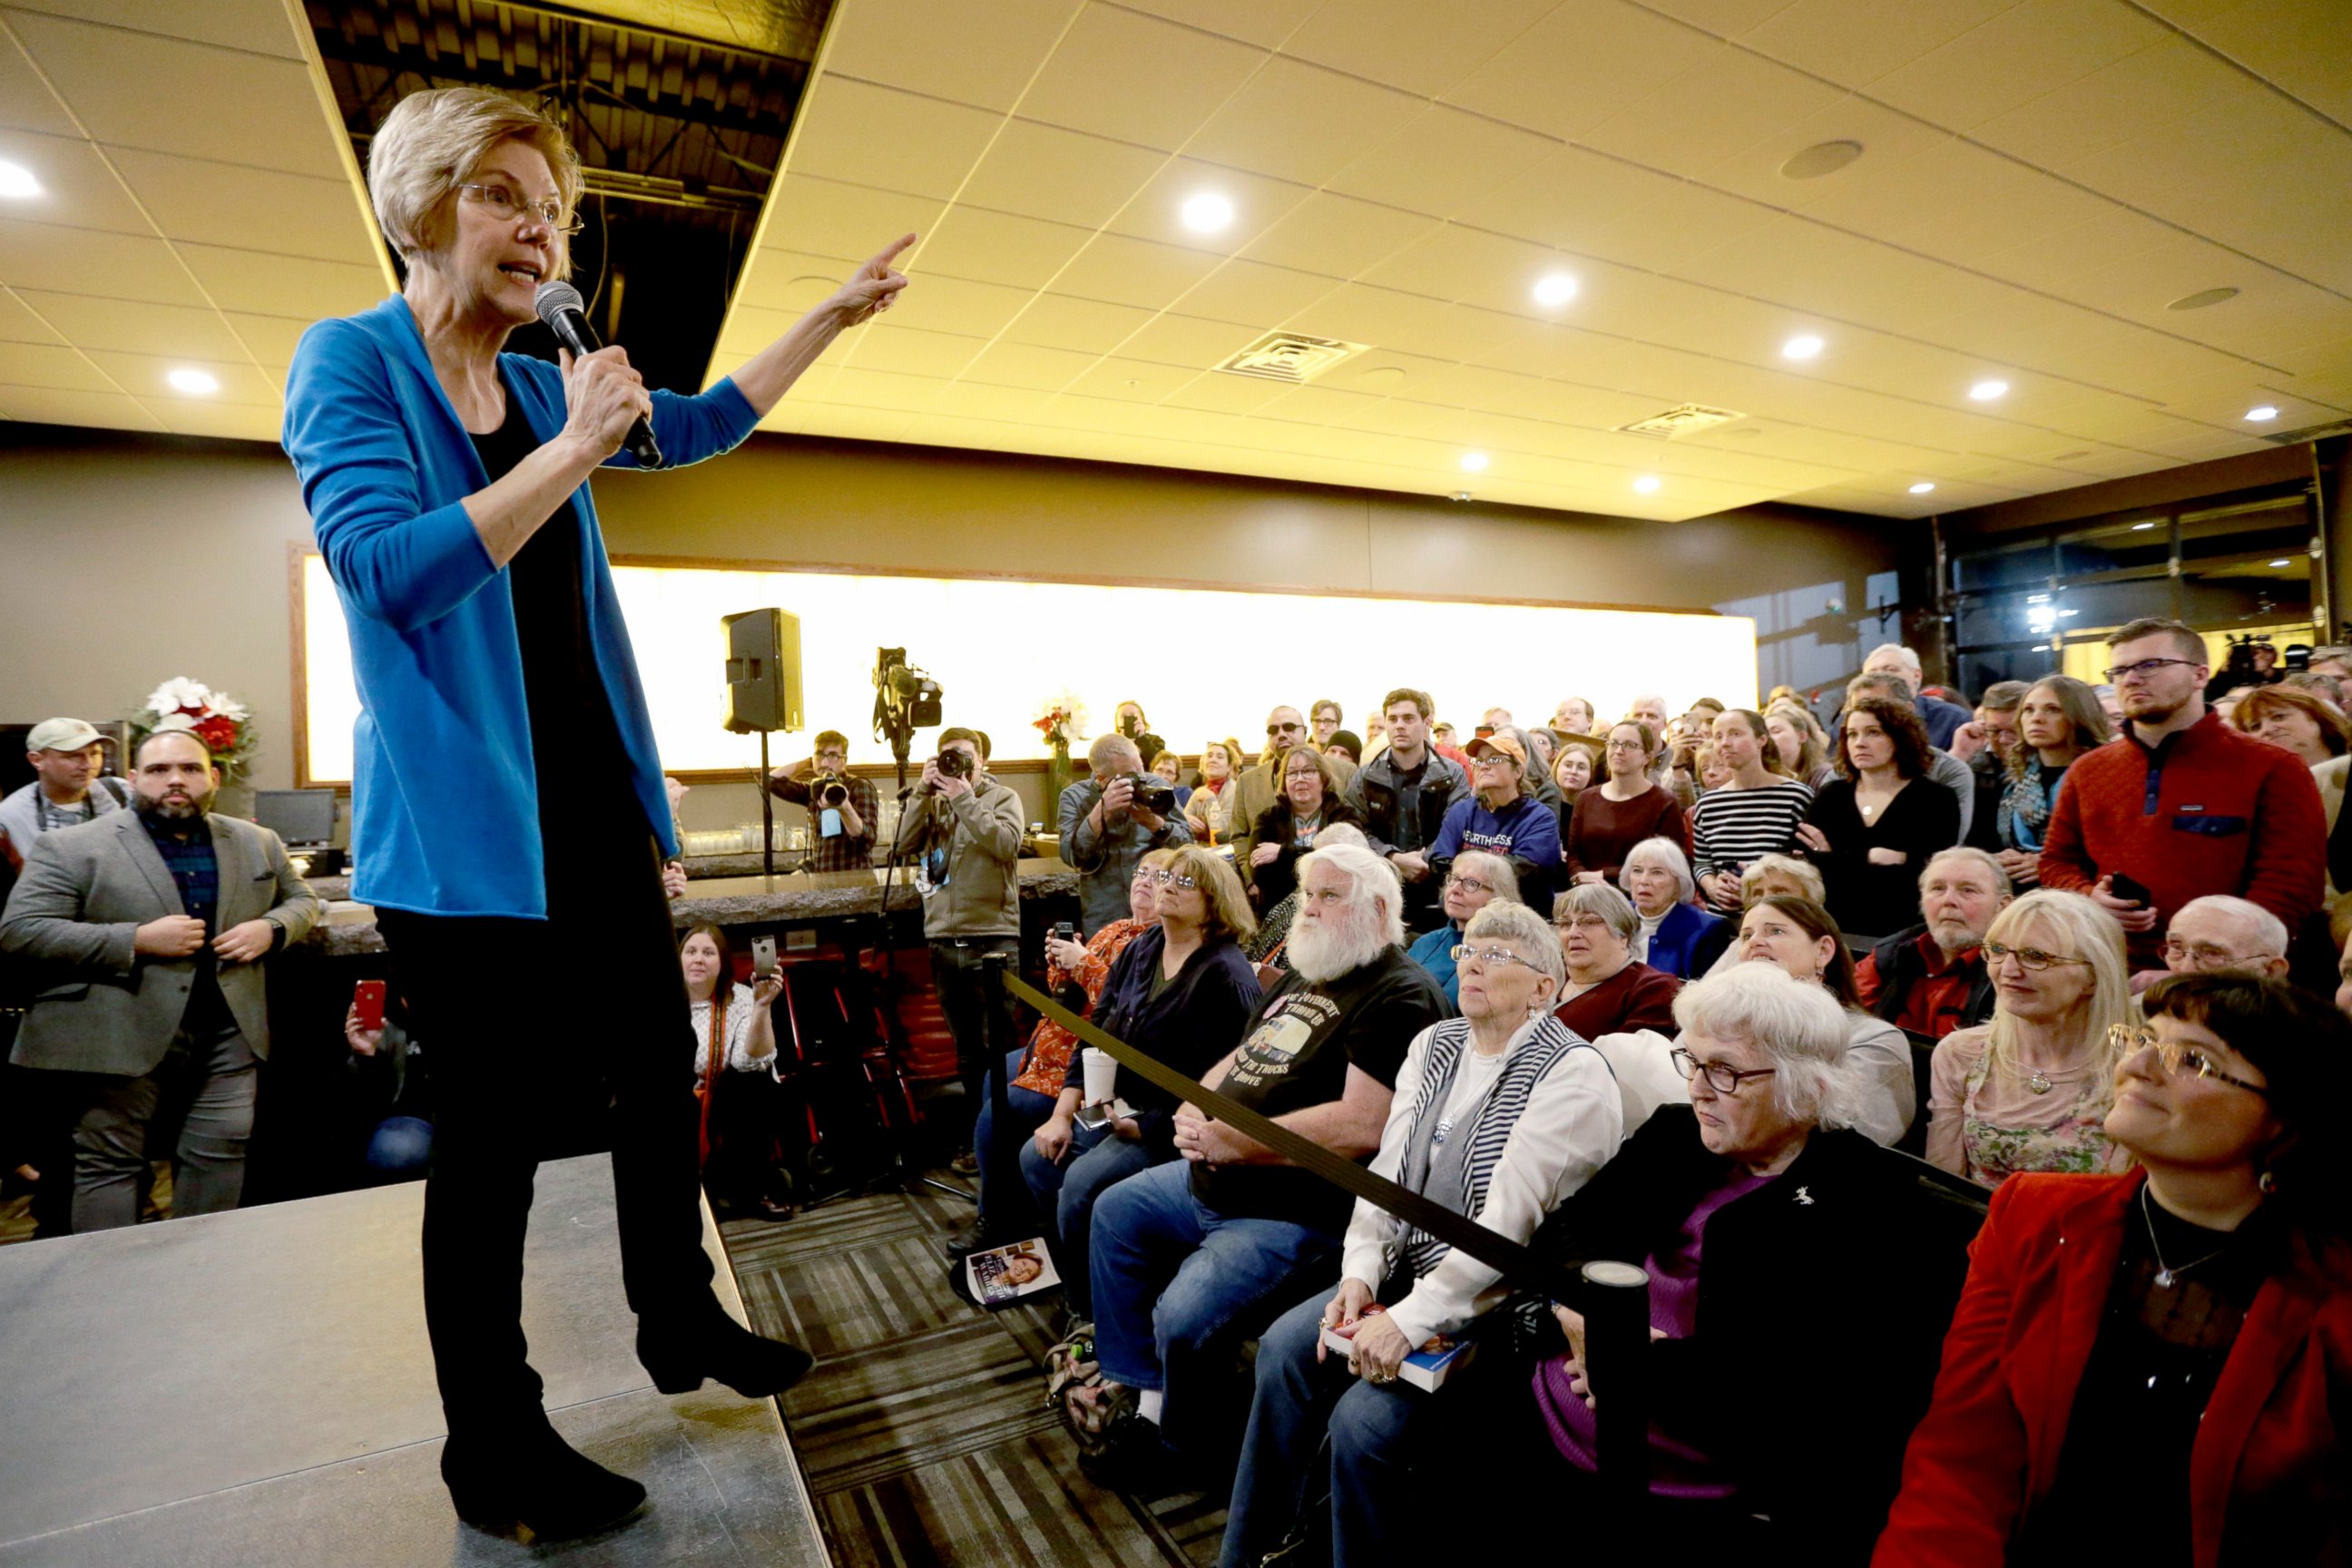 Sen. Elizabeth Warren, D-Mass, speaks during an organizing event at McCoy's Bar Patio and Grill in Council Bluffs, Iowa, Friday, Jan. 4, 2019.